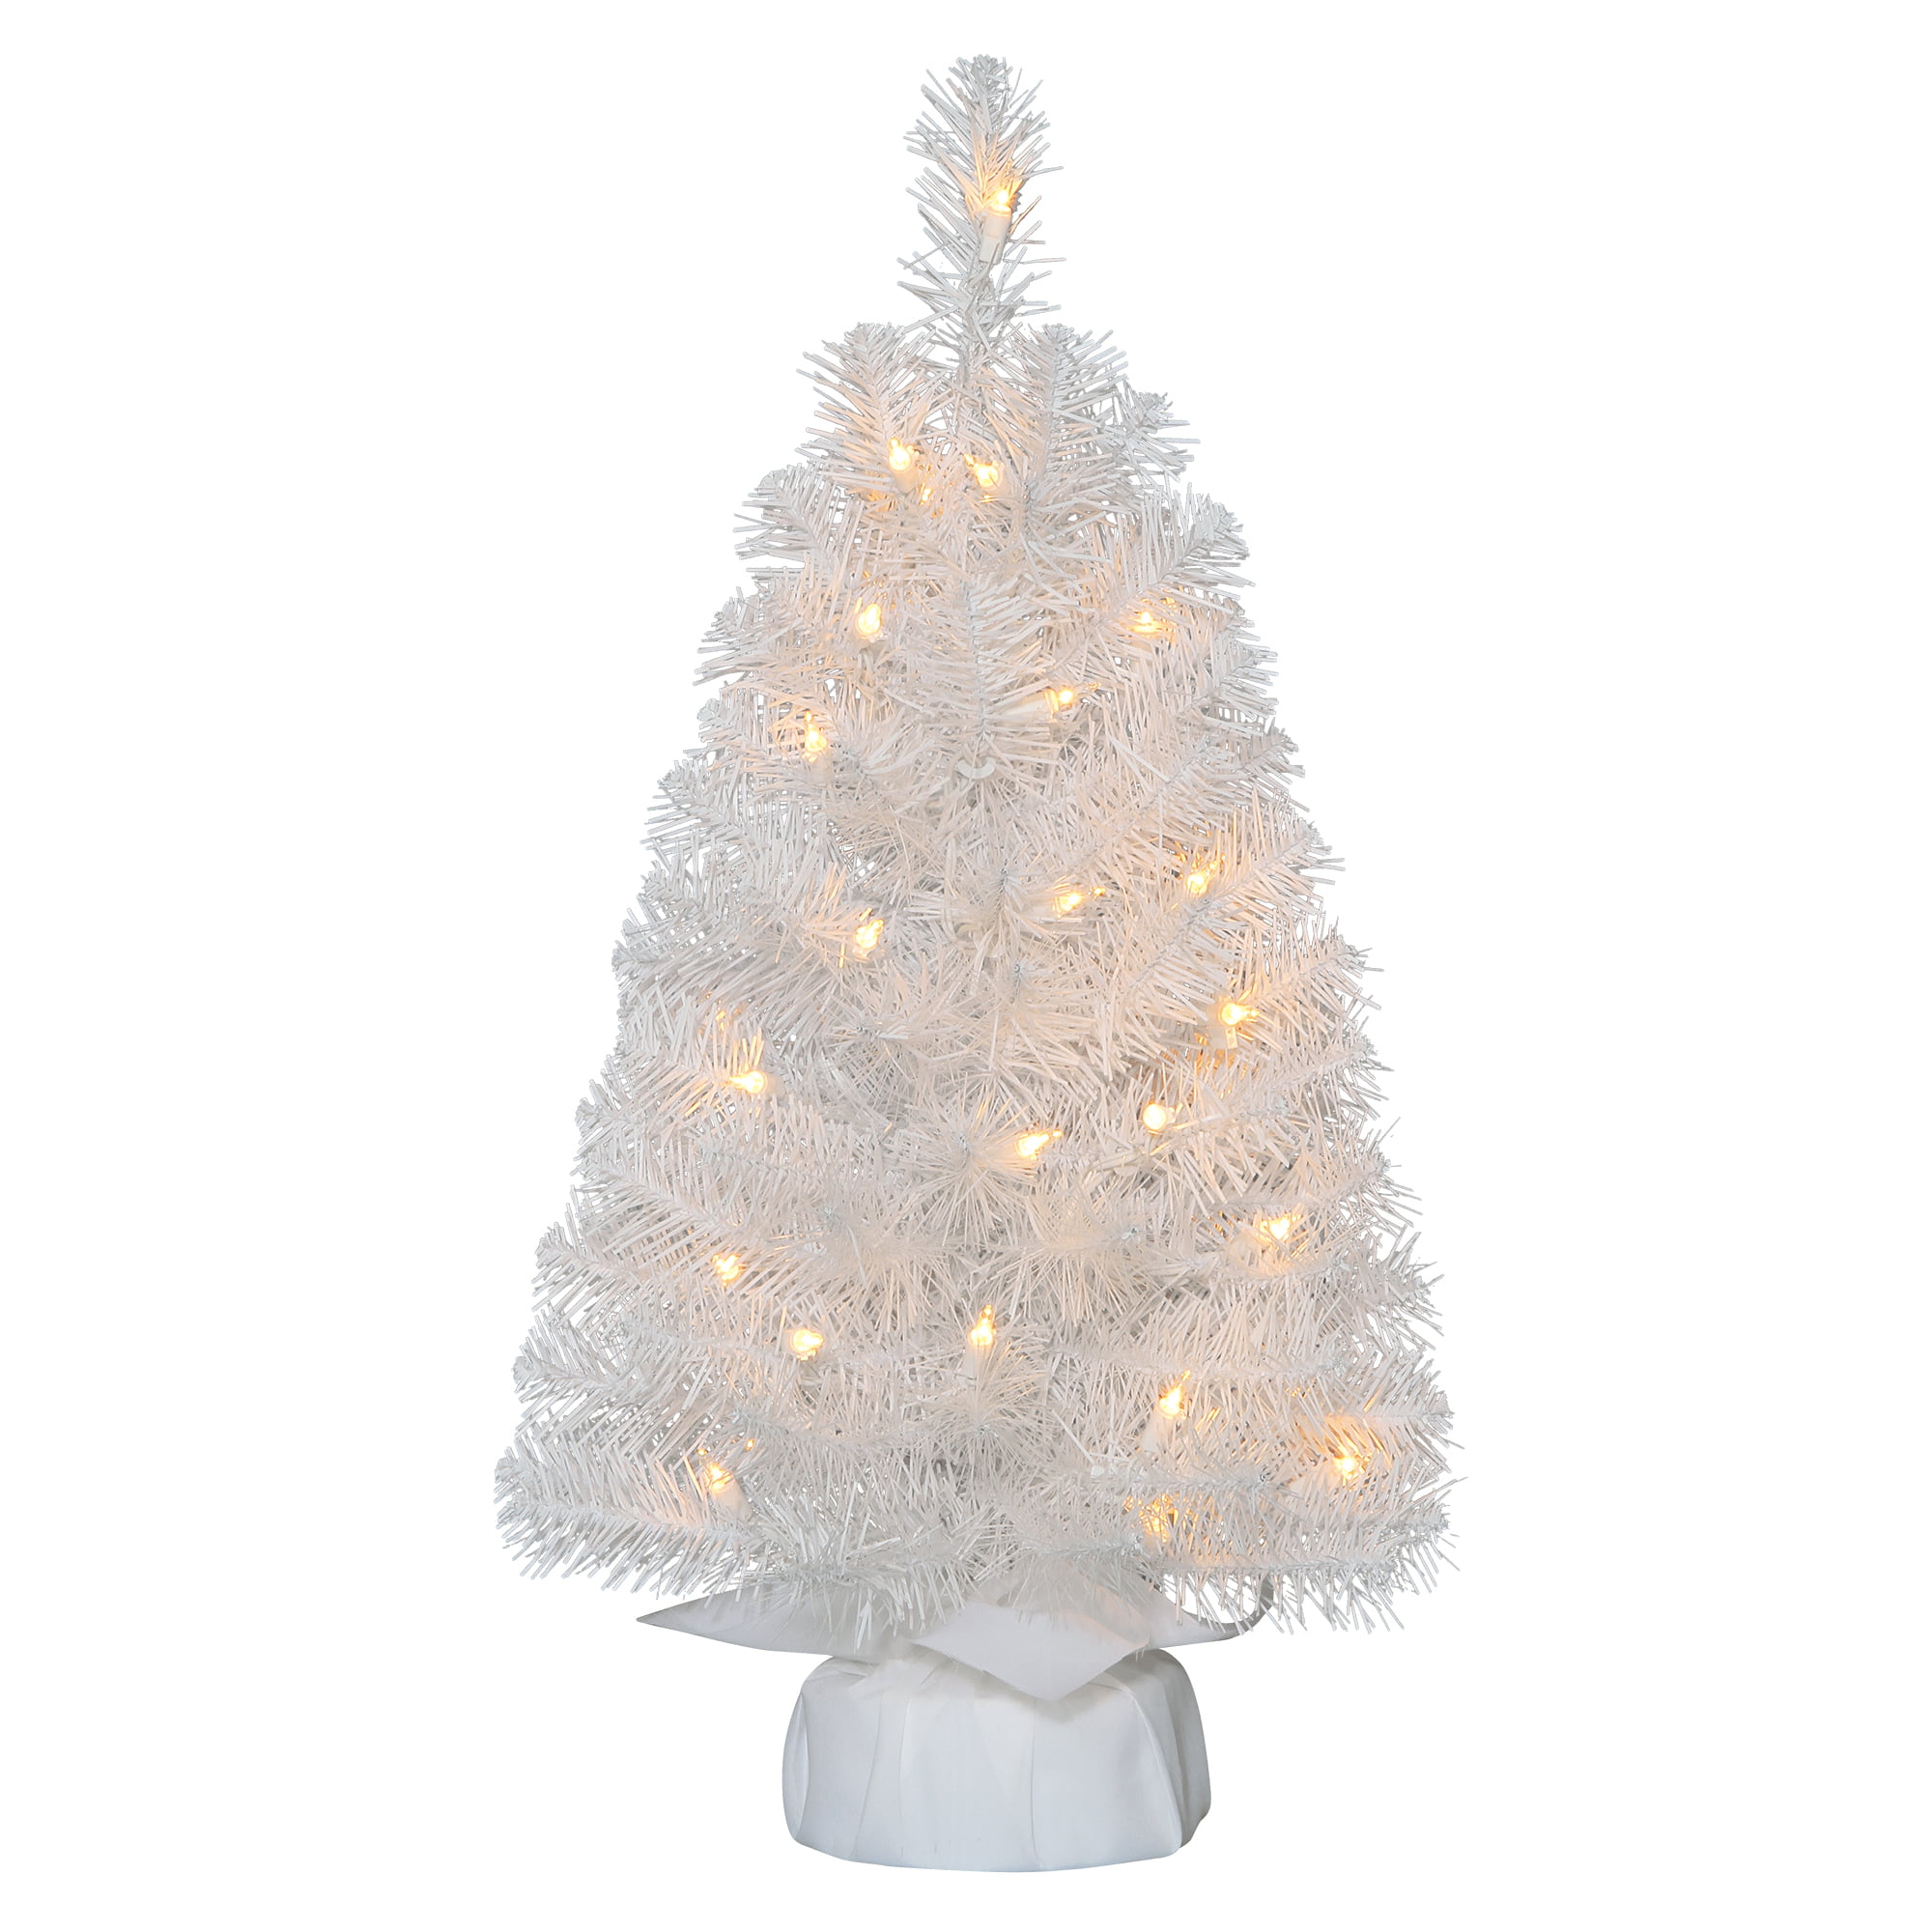 2 Ft Christmas Tree Noble Fir White Artificial Clear Lights Holiday Time Pre Lit